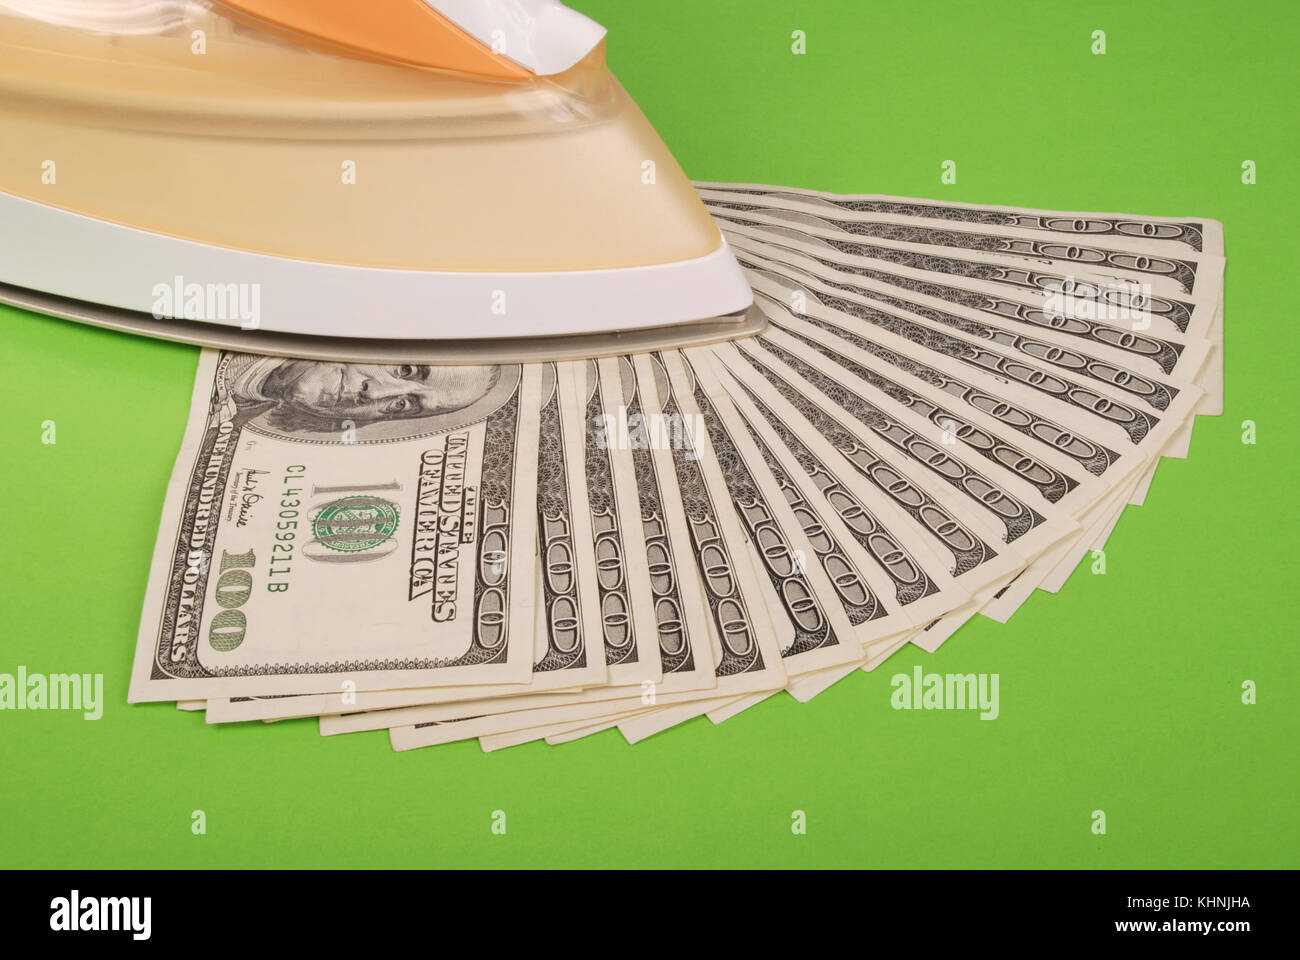 Dollars lay under an electric iron. On green background Stock Photo